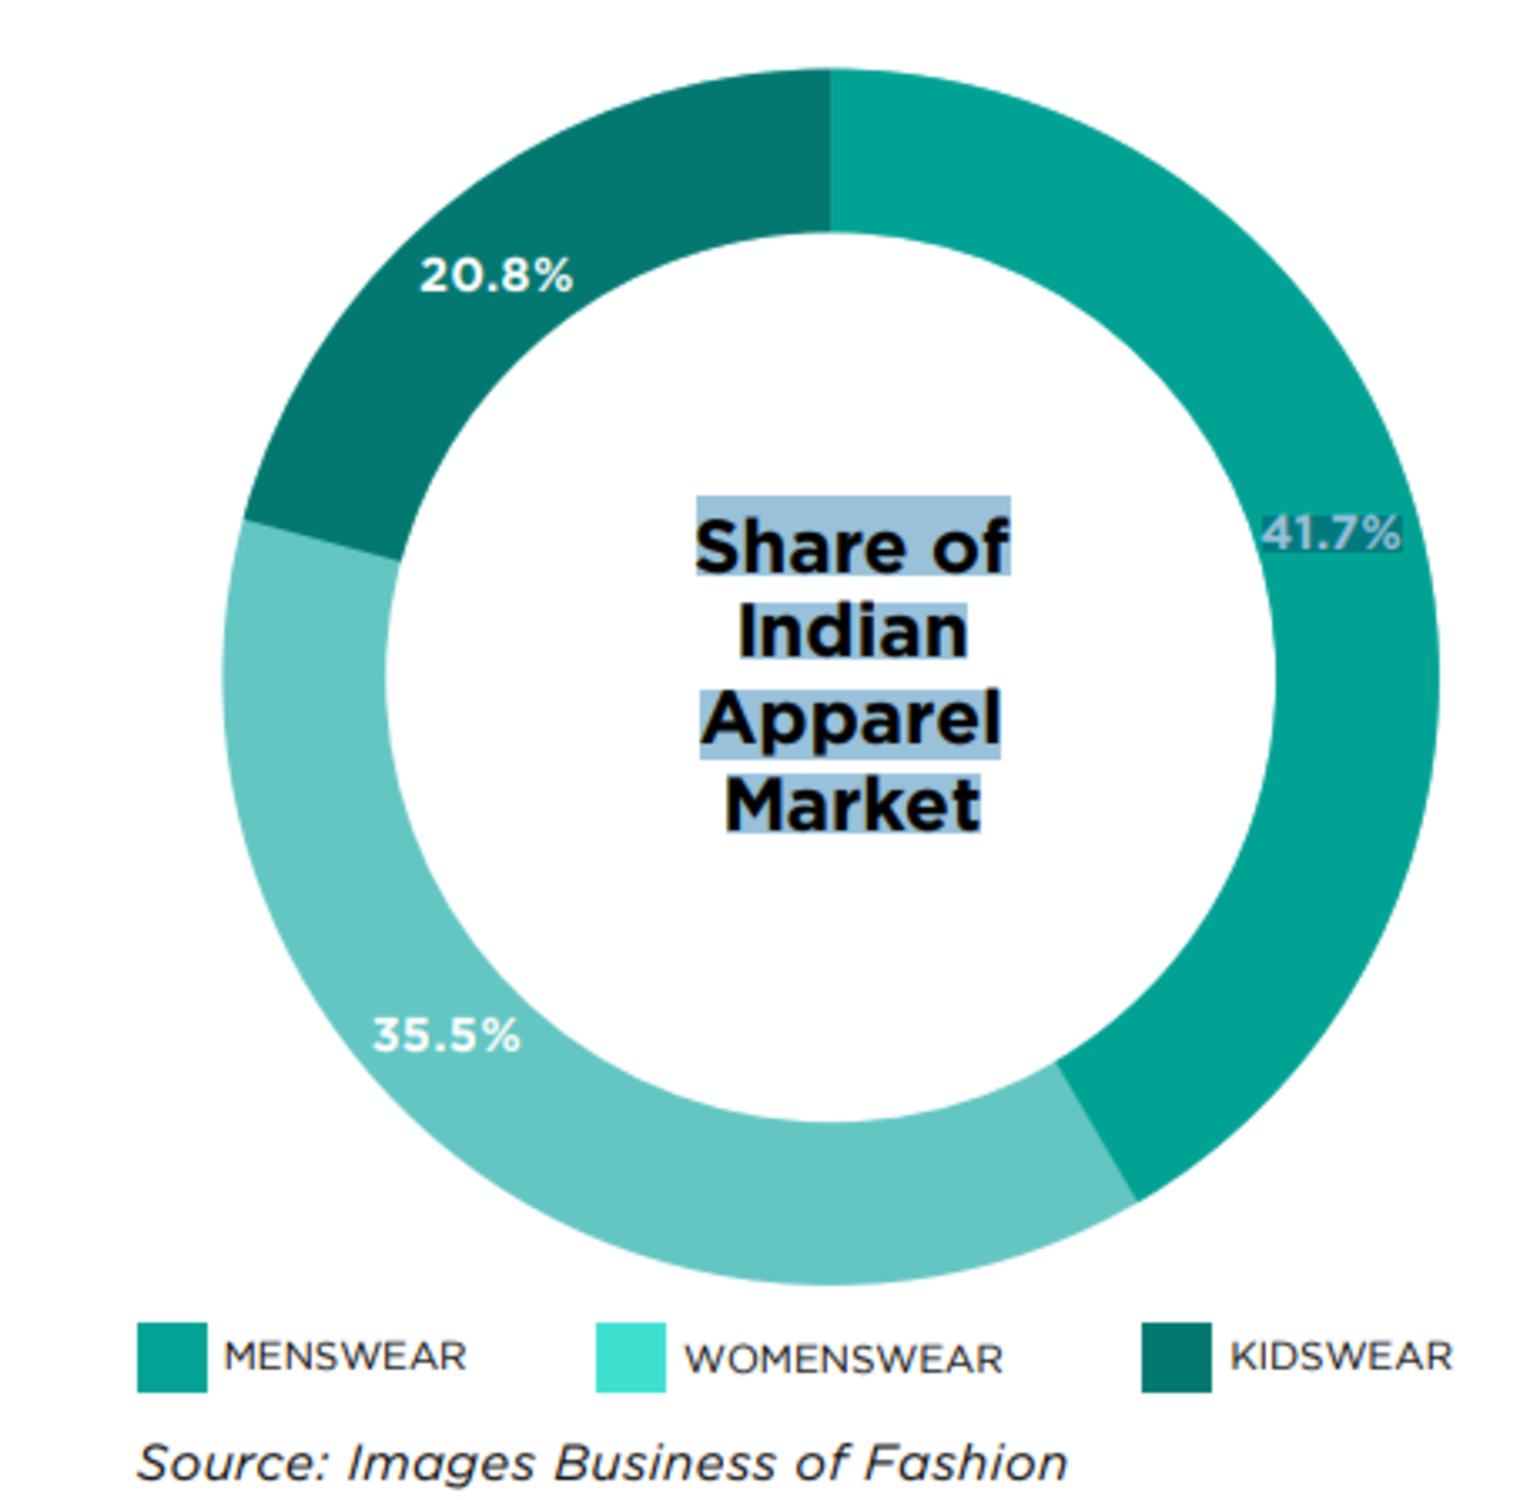 Share of Indian Apparel market